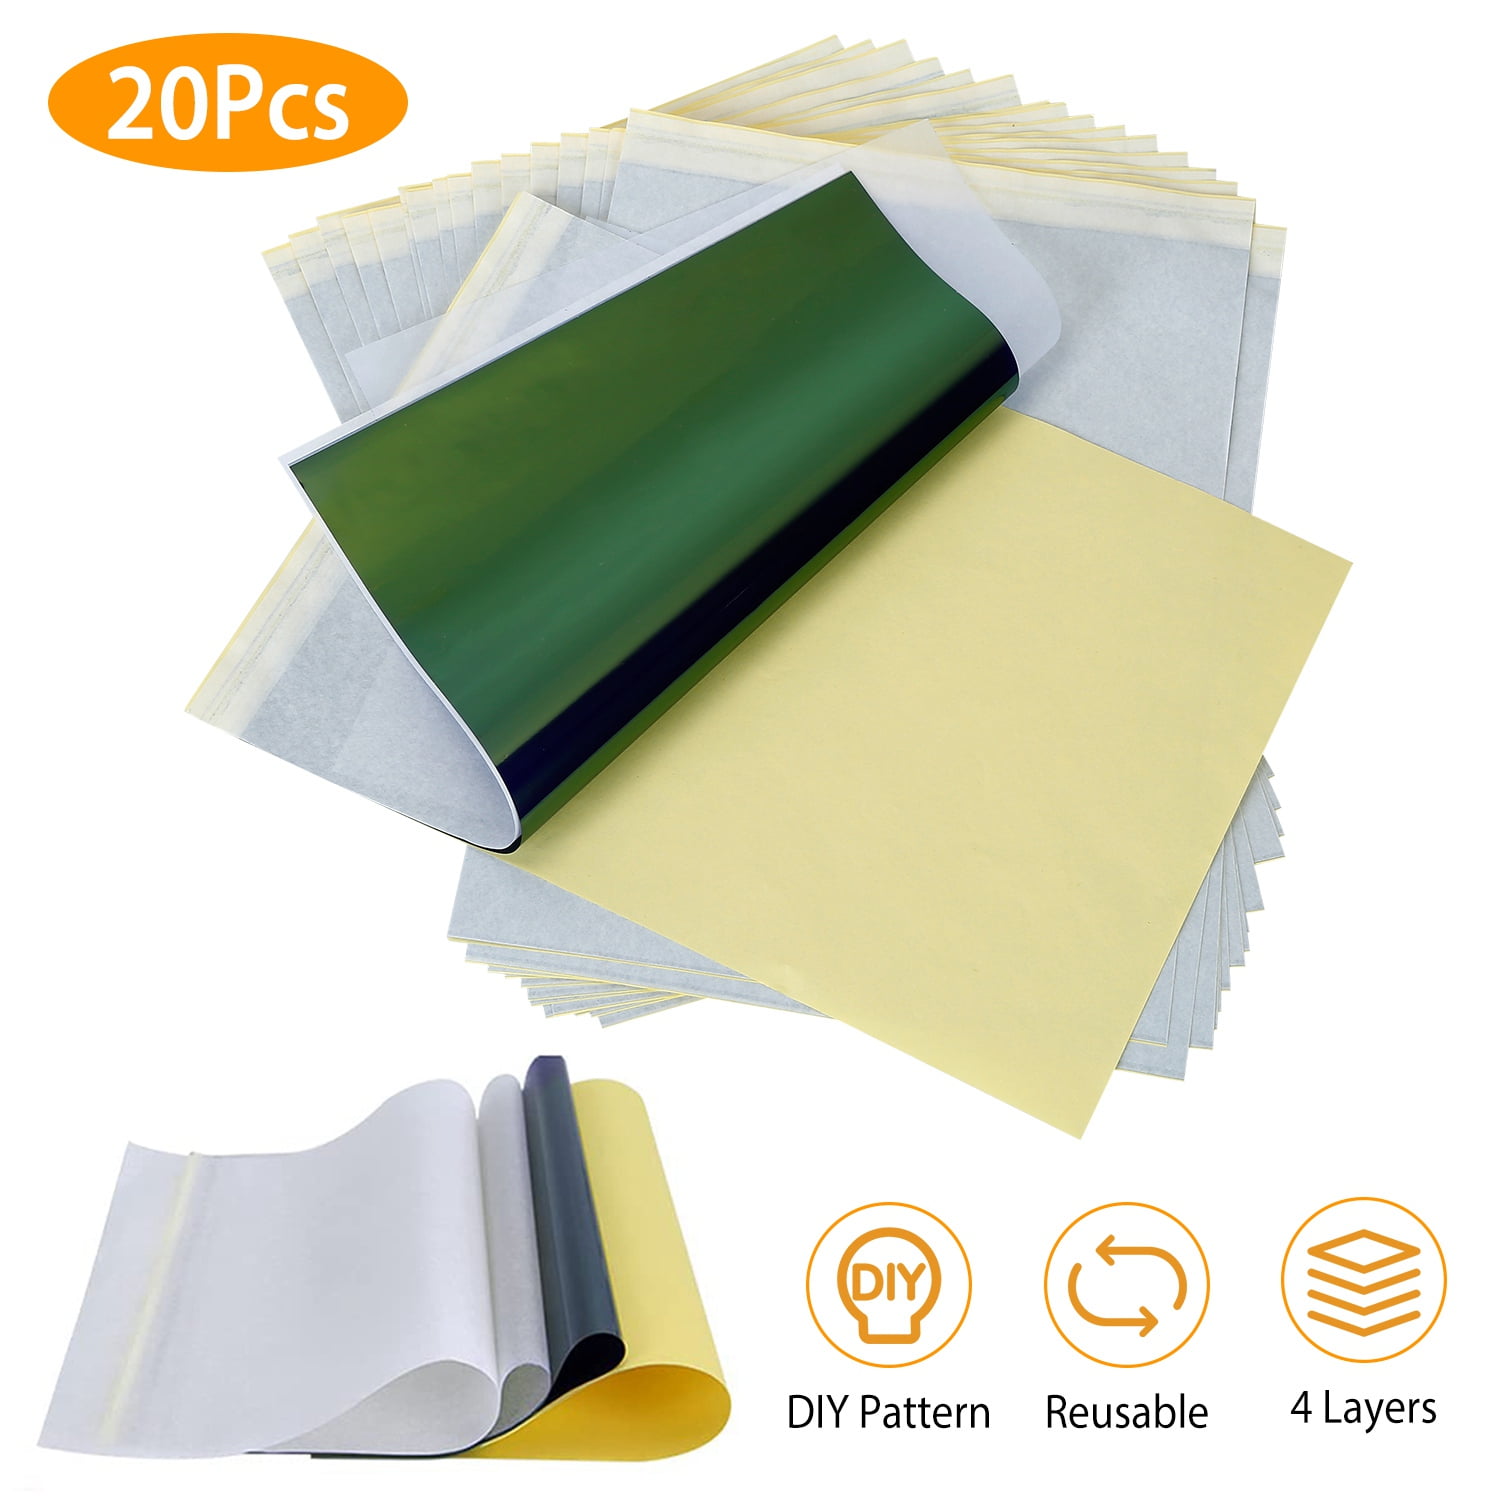  Beavorty 60pcs Stencil Paper Transfer Paper Tracing